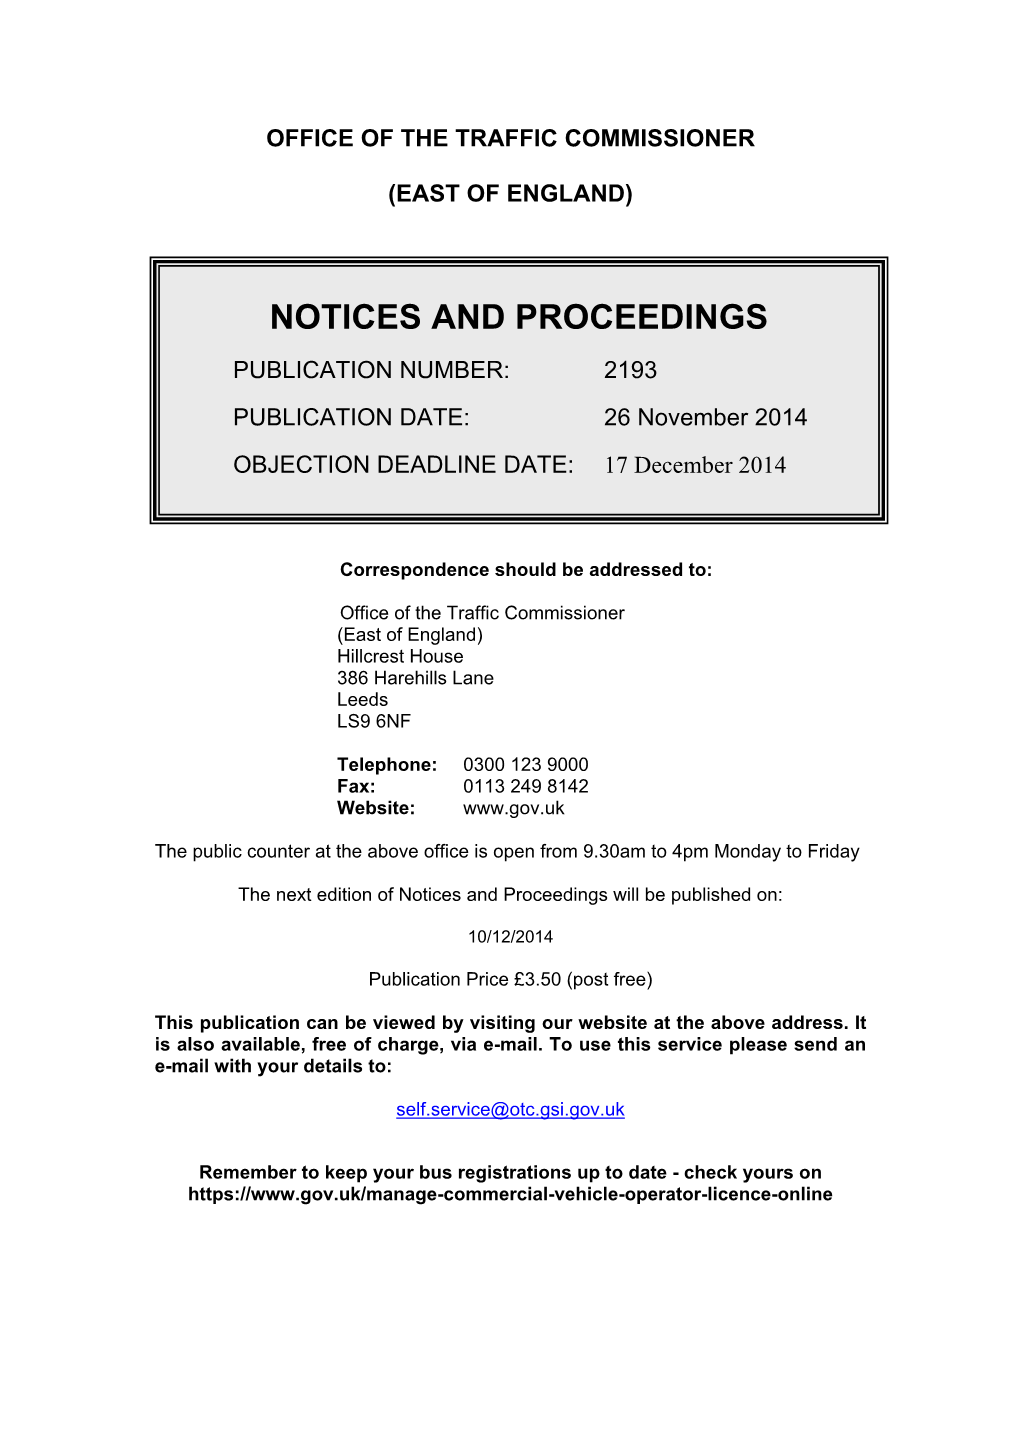 NOTICES and PROCEEDINGS 26 November 2014